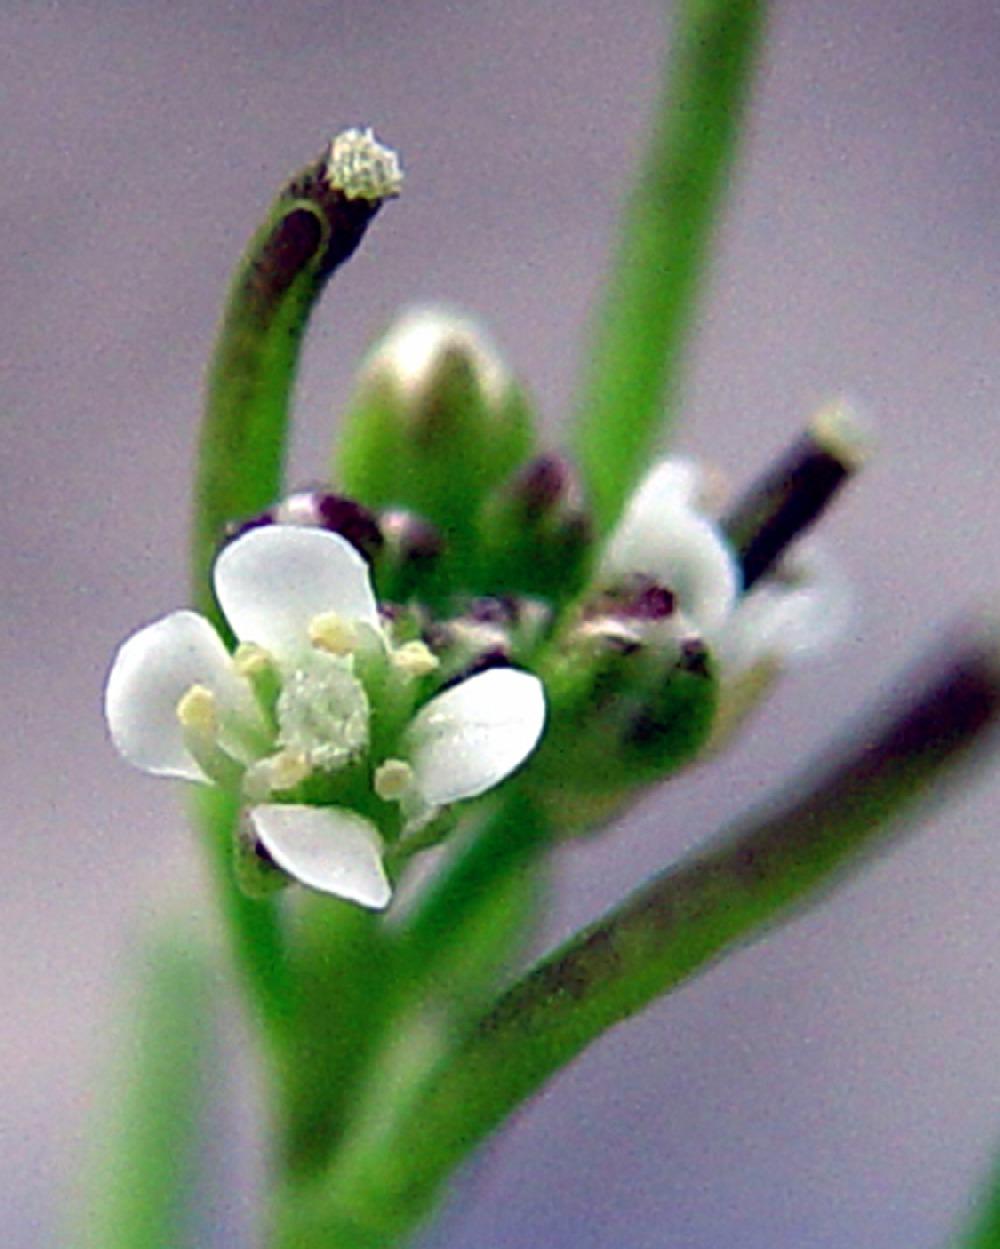 The fruit is an elongated flattened capsule called a silique (Figure 5), which is about 1 inch long. Flowers and fruit of Pennsylvania bittercress are very similar.